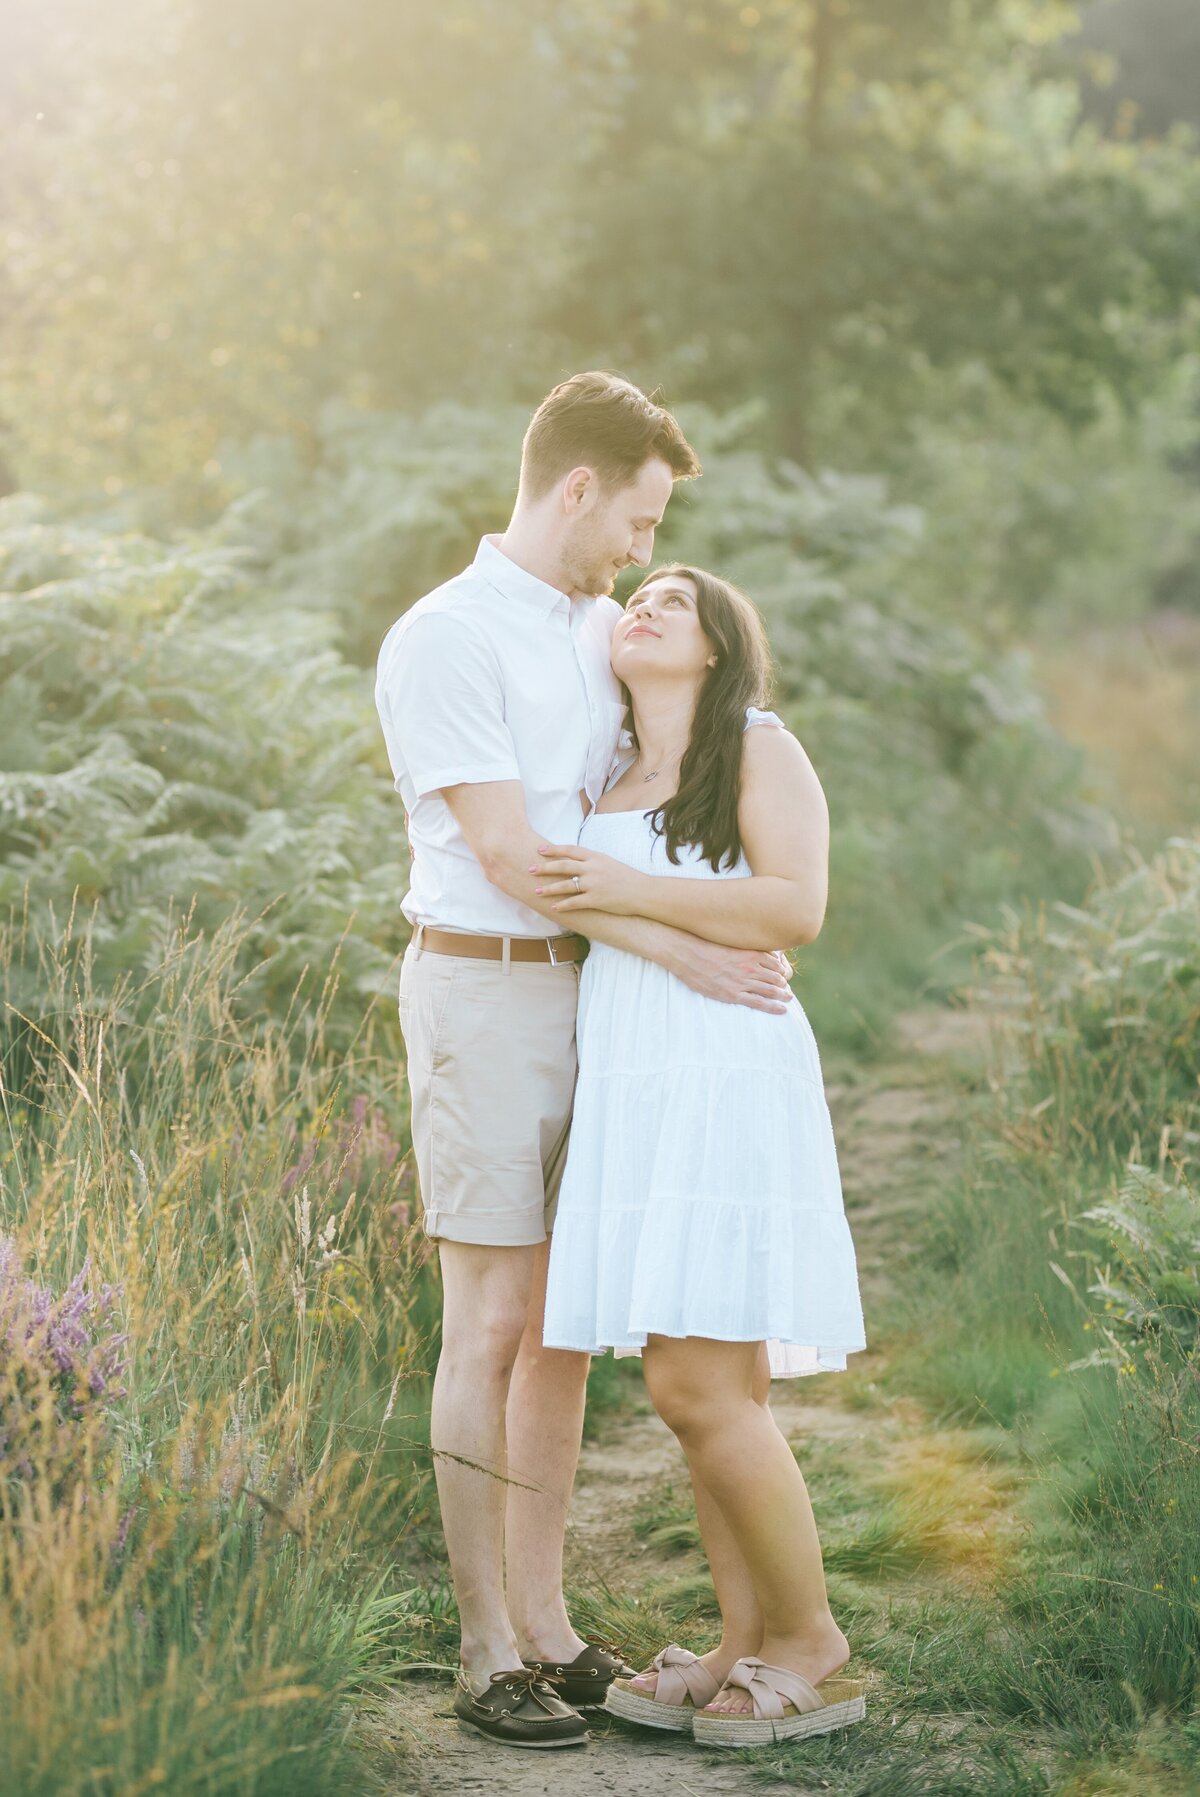 Engagement photoshoot, couple are cuddling at chobham cobham, she wears a white dress he wears a white shirt and beige shorts